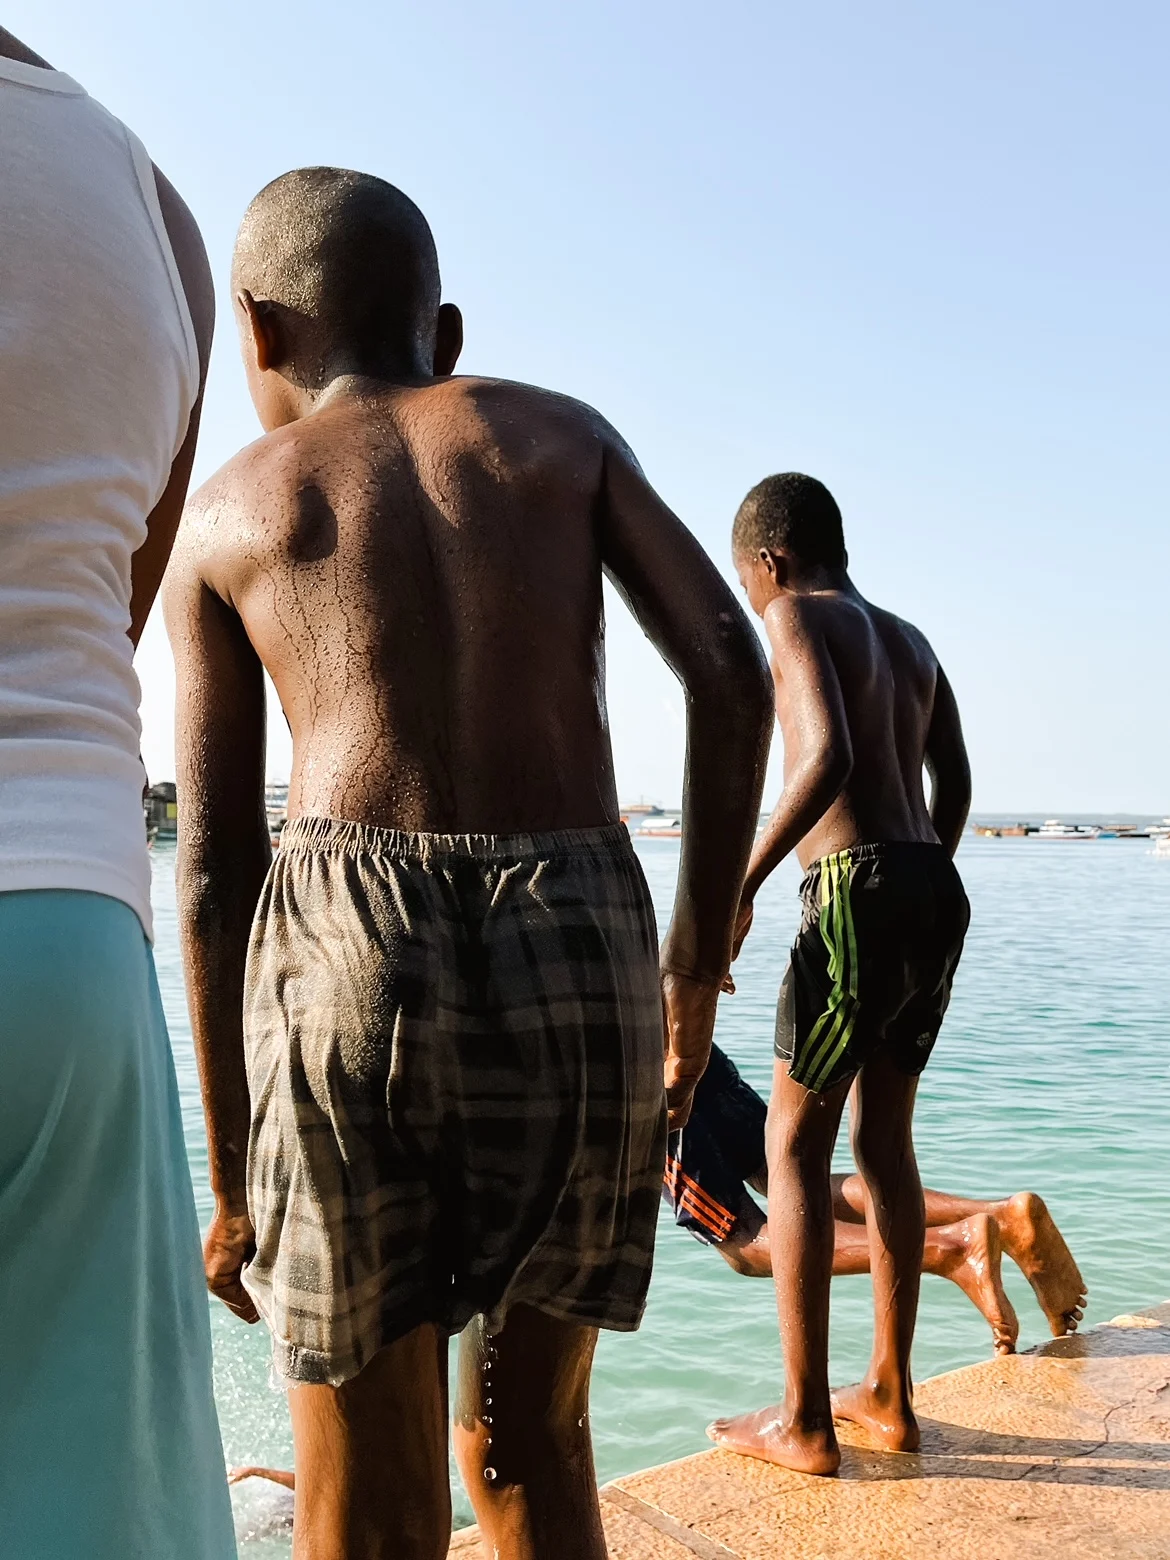 A photograph of some boys playing by the water in Zanzibar, Tanzania. One dives into the water while the others look on. 